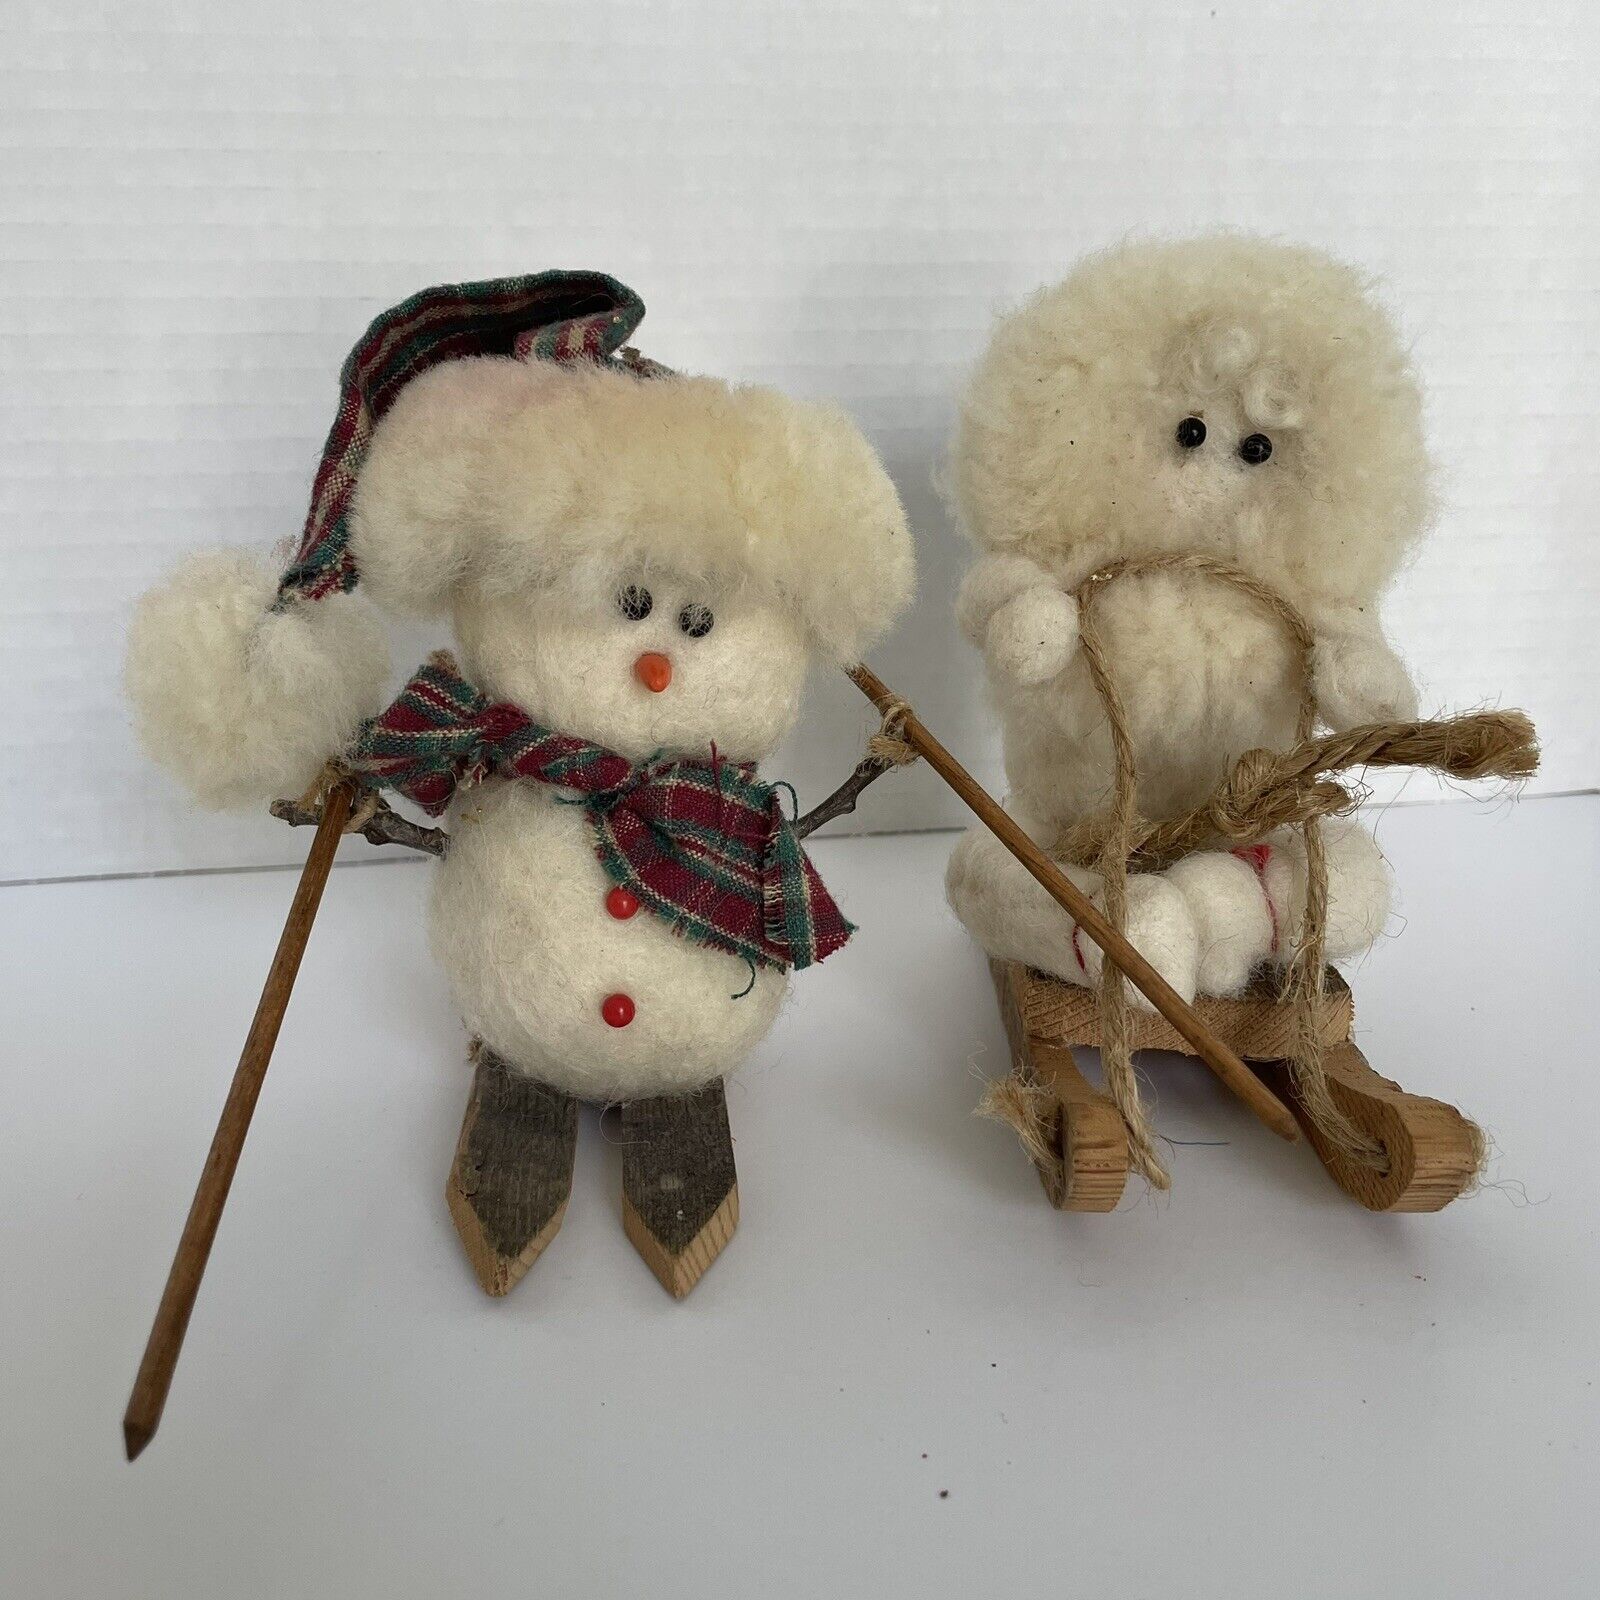 Wooly Snowman (set of 2) On Wooden Sled Ski Handmade Figurines Made In Minnesota